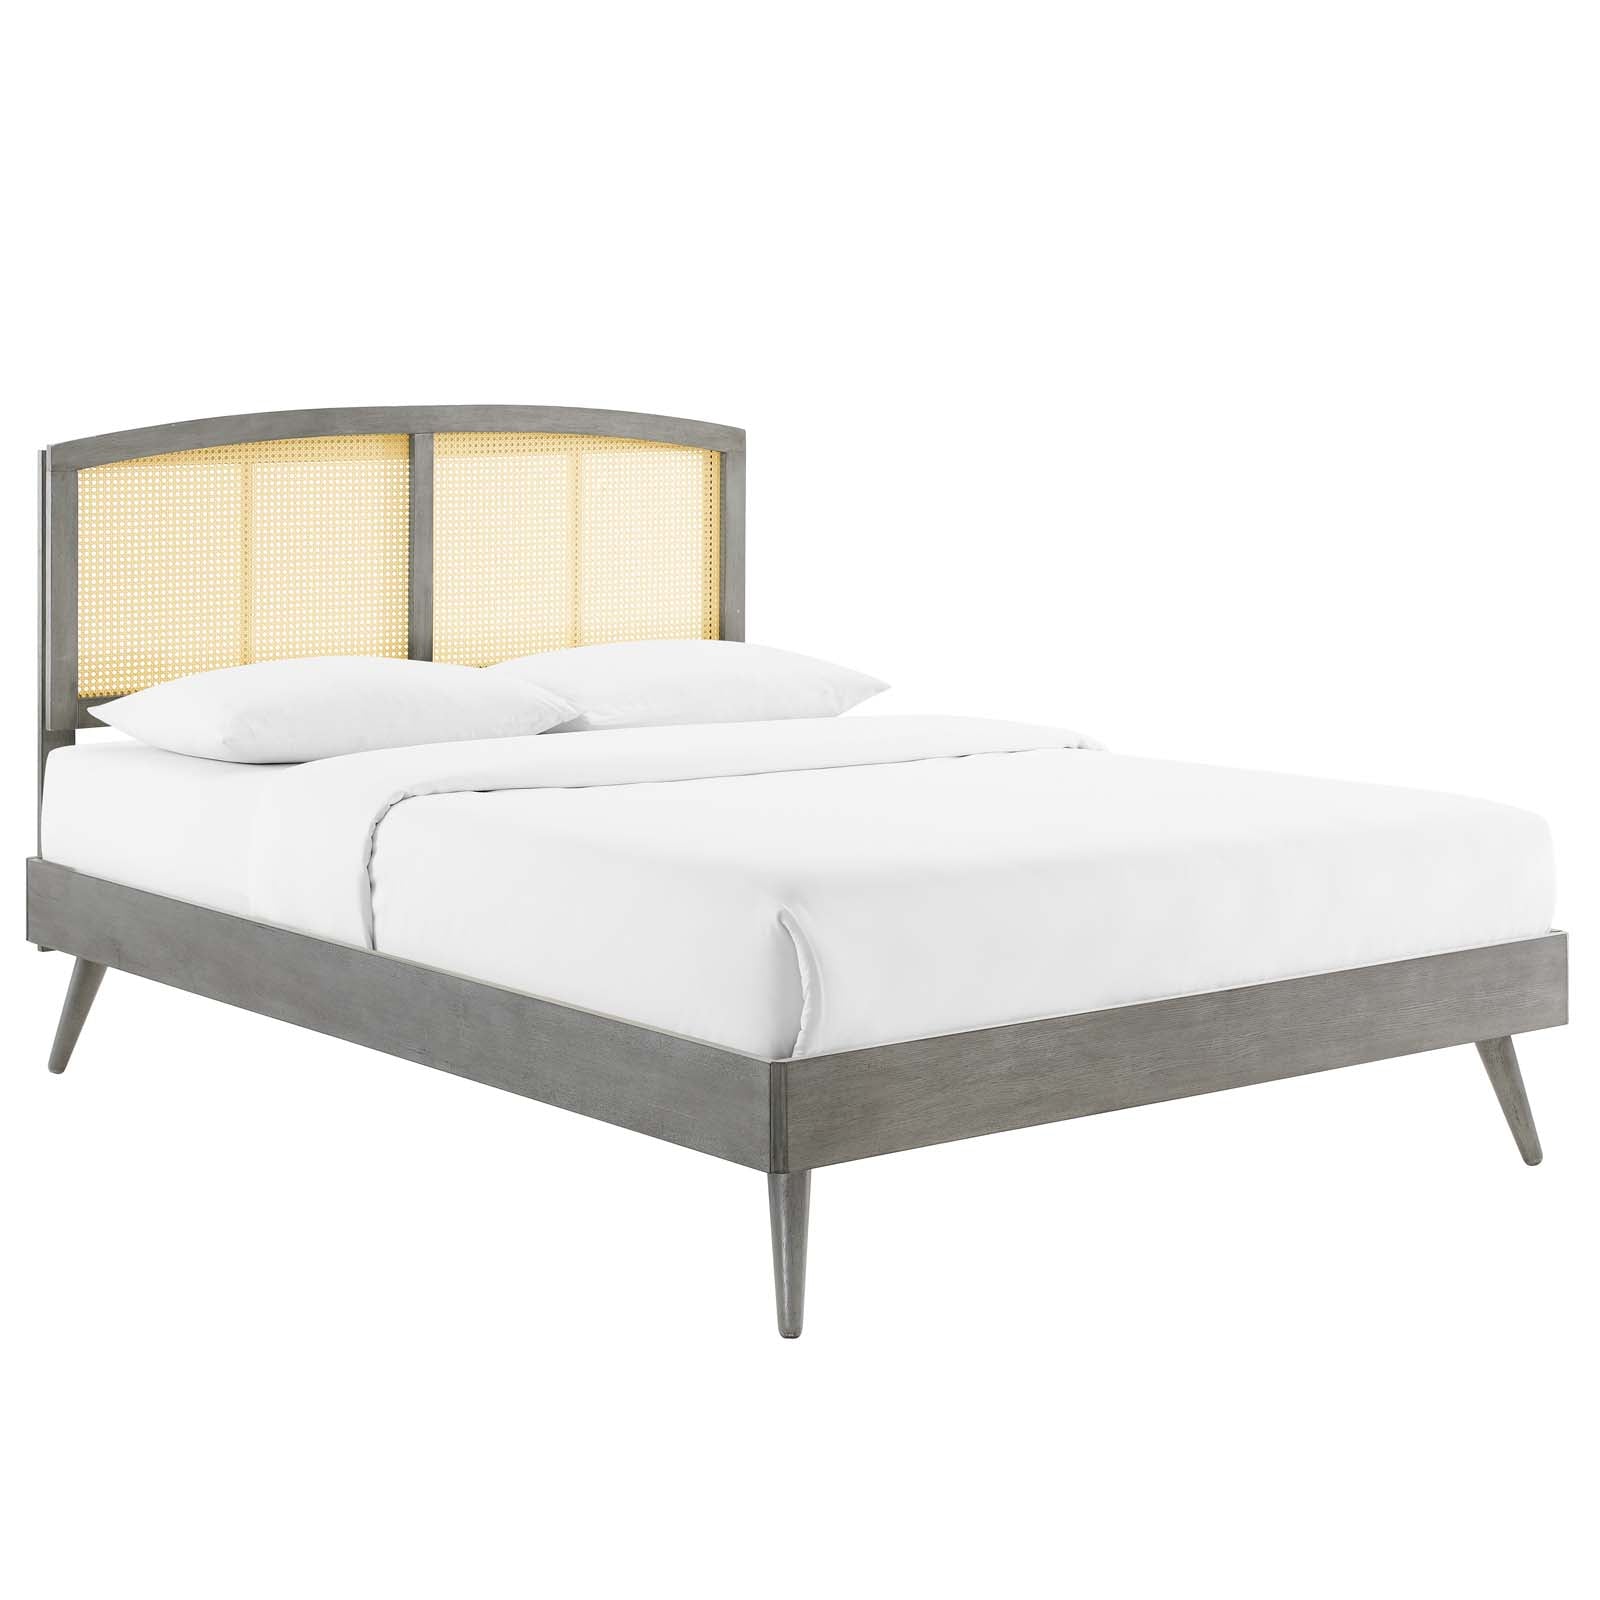 Modway Beds - Sierra Cane and Wood Full Platform Bed With Splayed Legs Gray